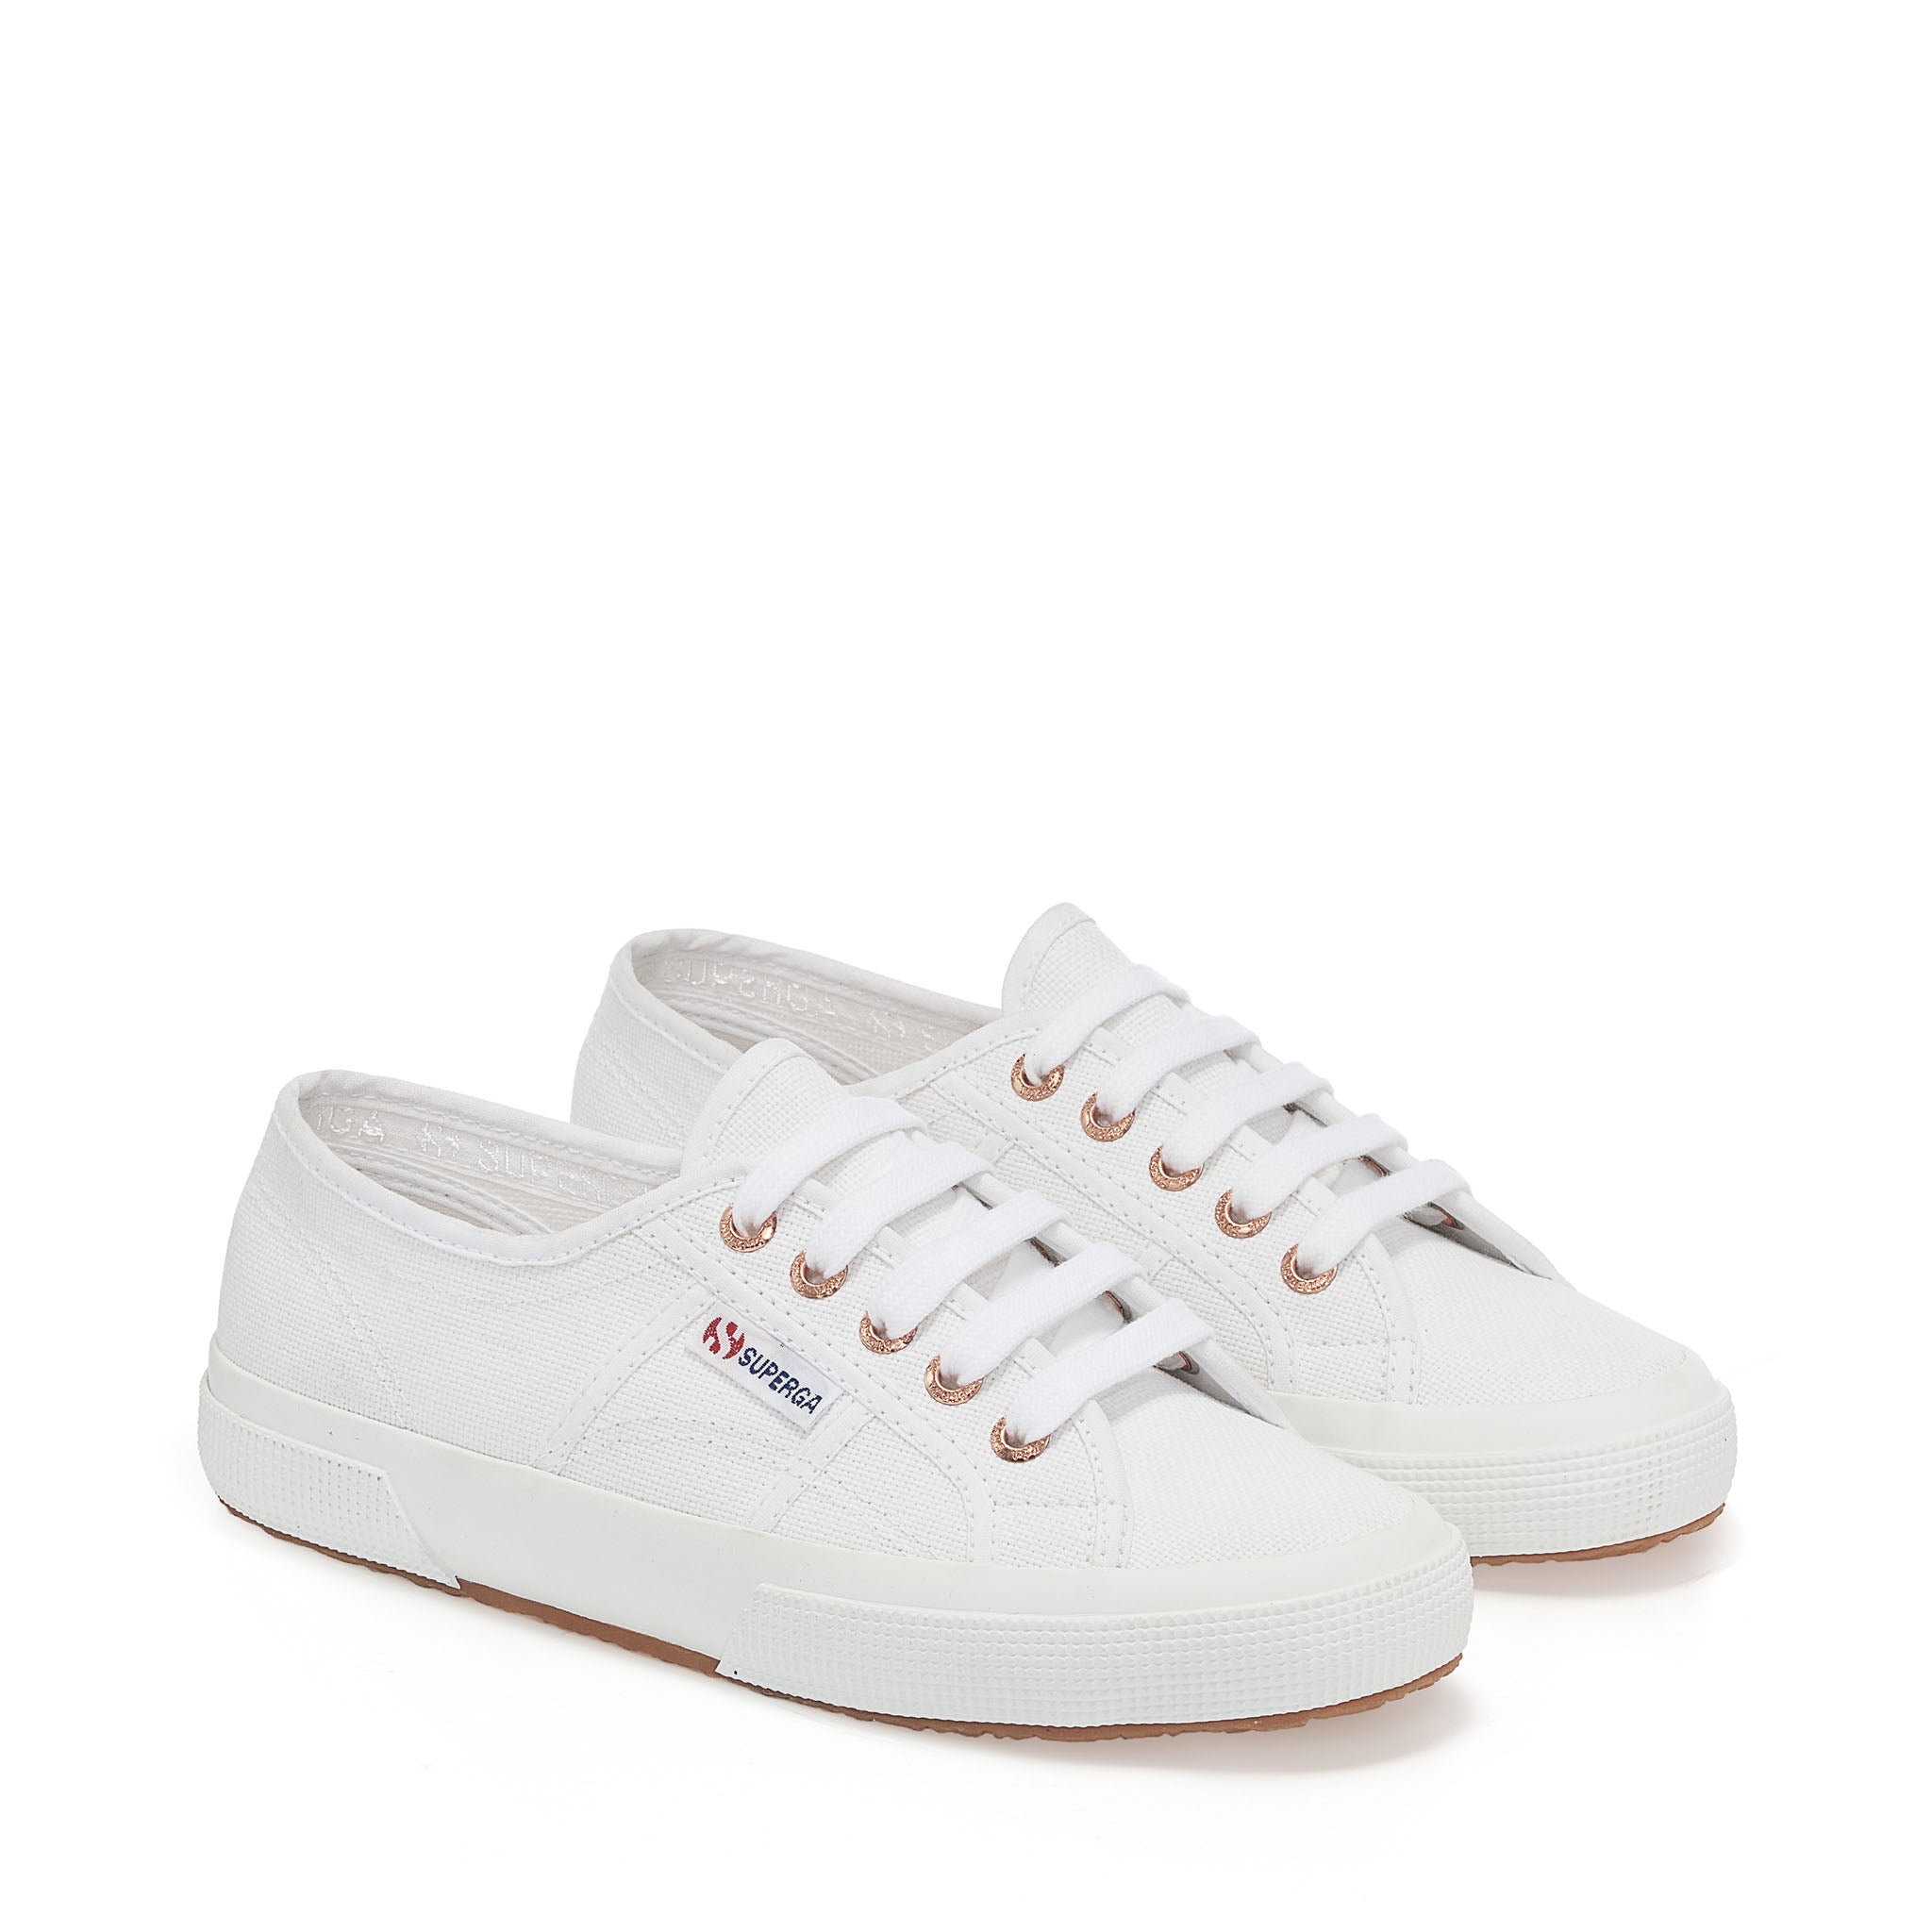 Superga 2750 Cotu Classic Sneakers - White Rose Gold. Front view.